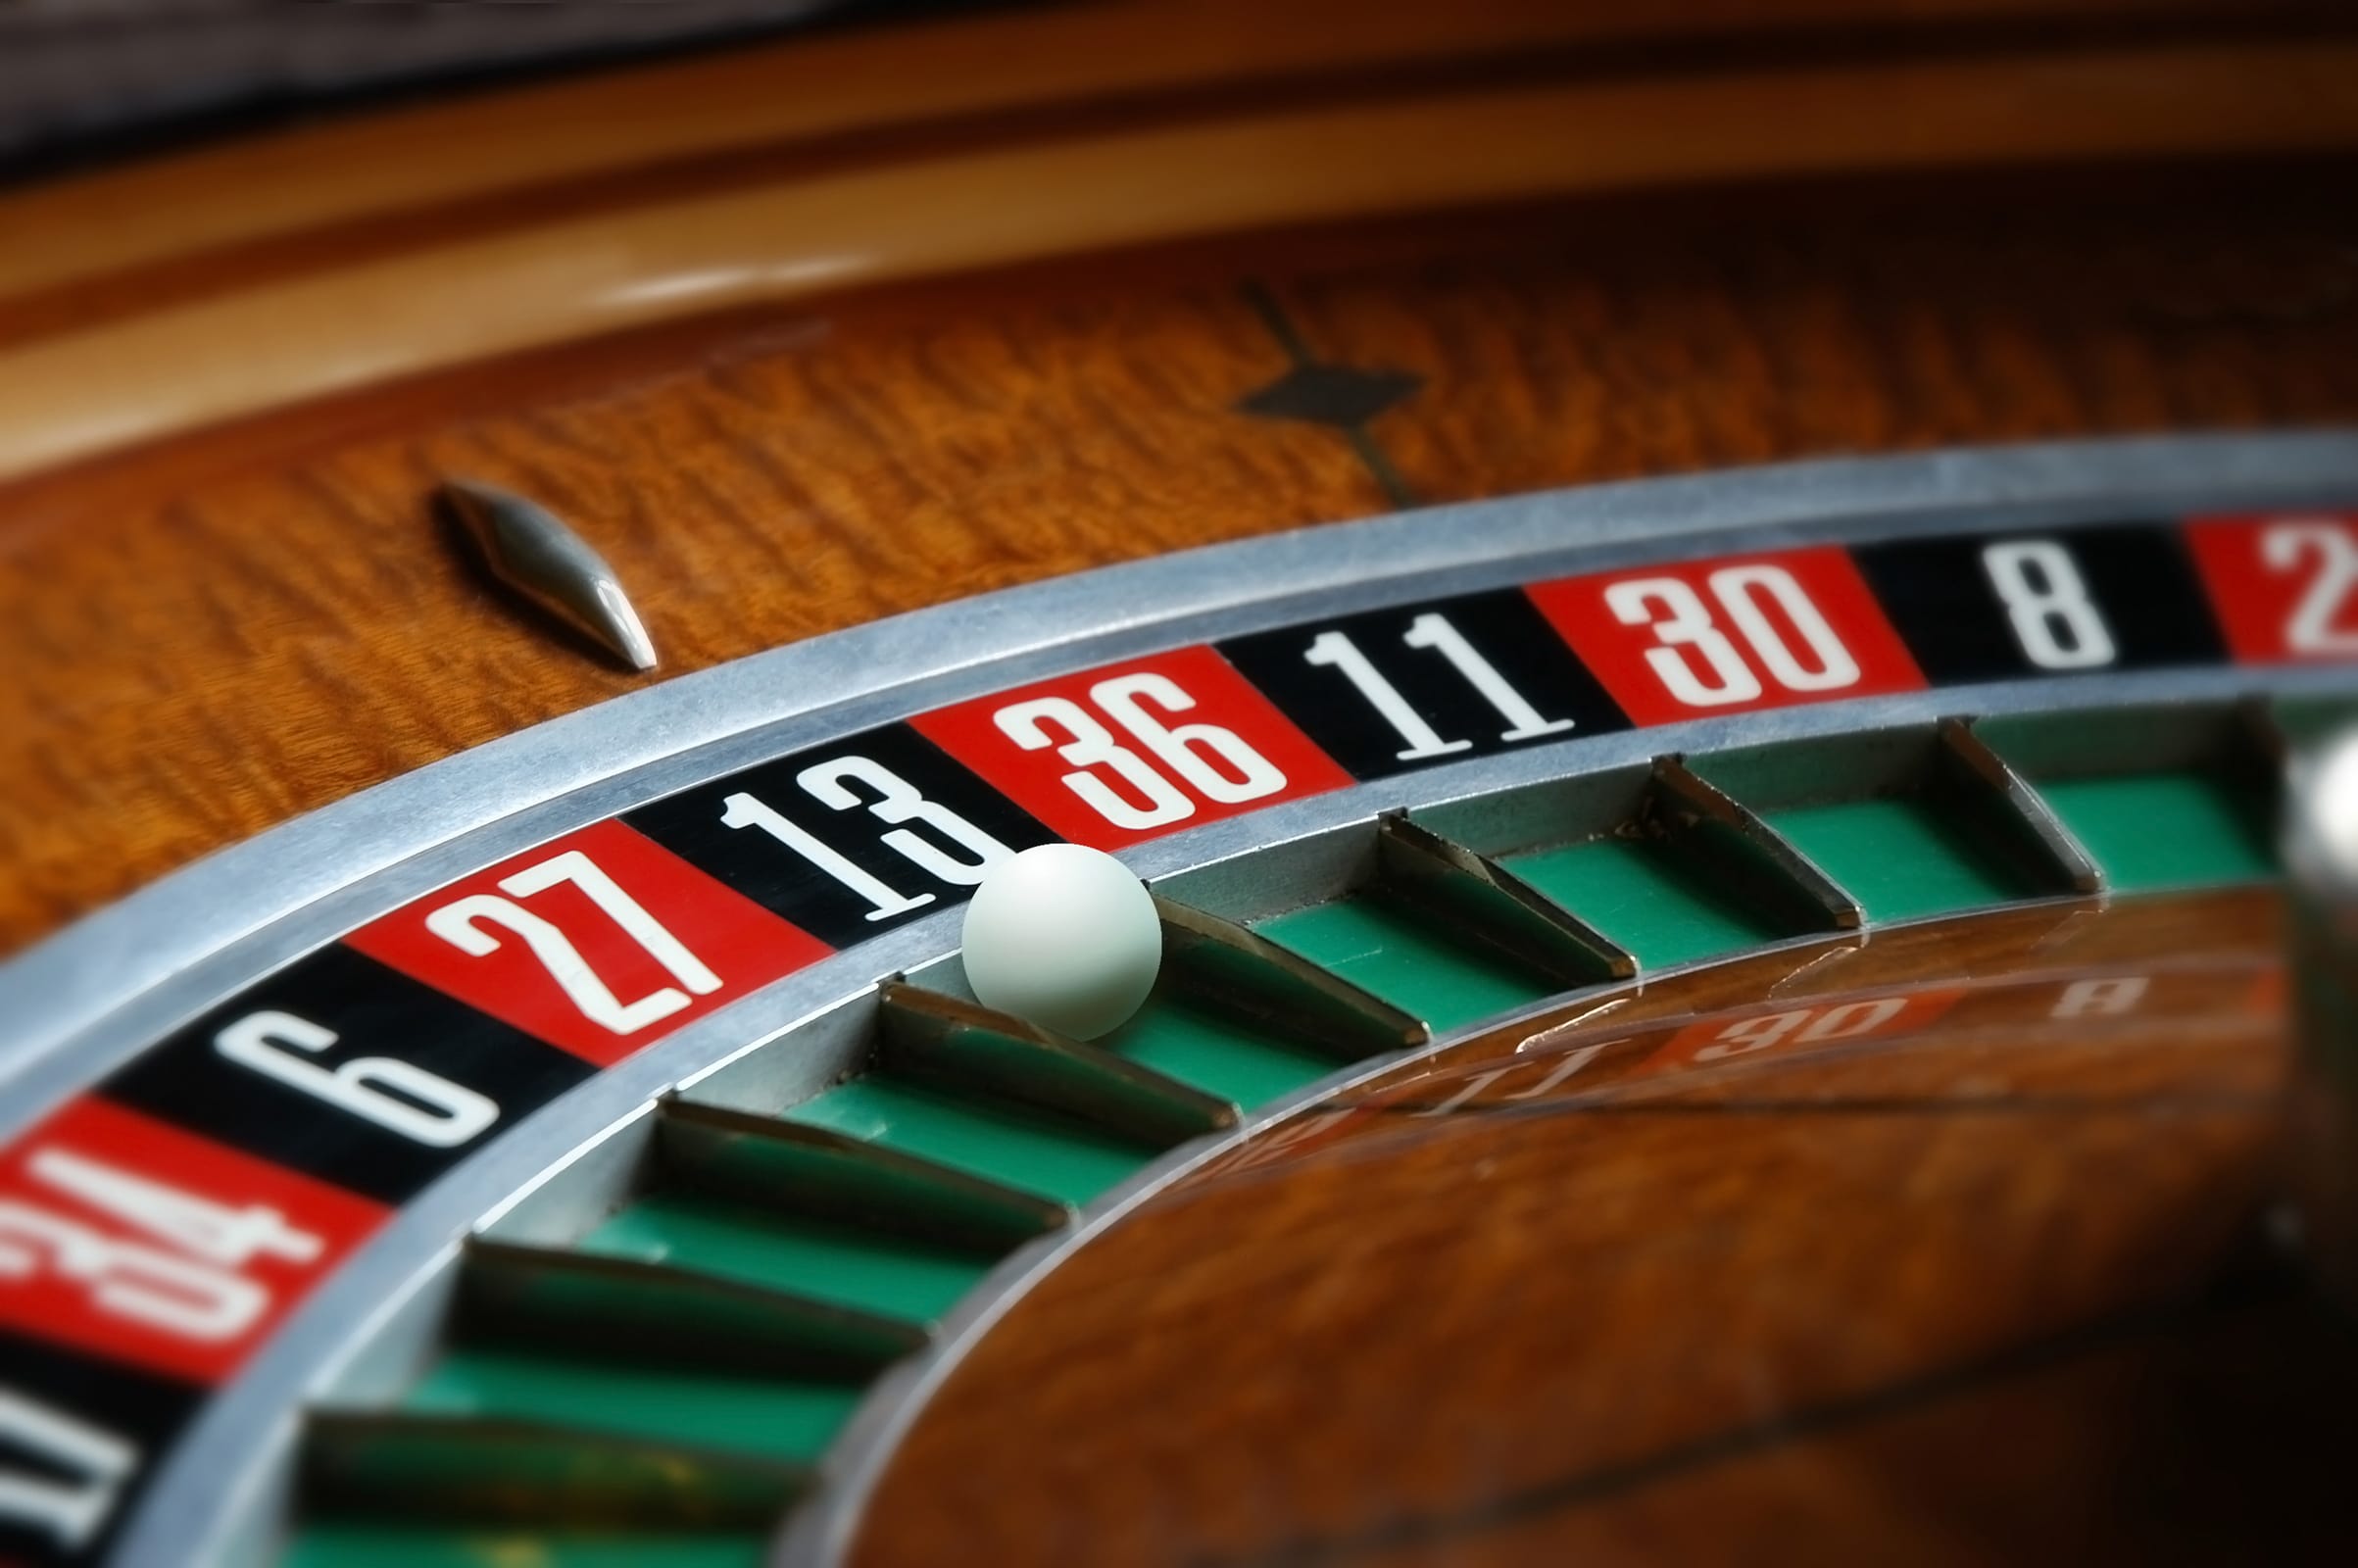 Roulette ball hits gambler in eye at off-Strip casino, lawsuit alleges, Casinos & Gaming